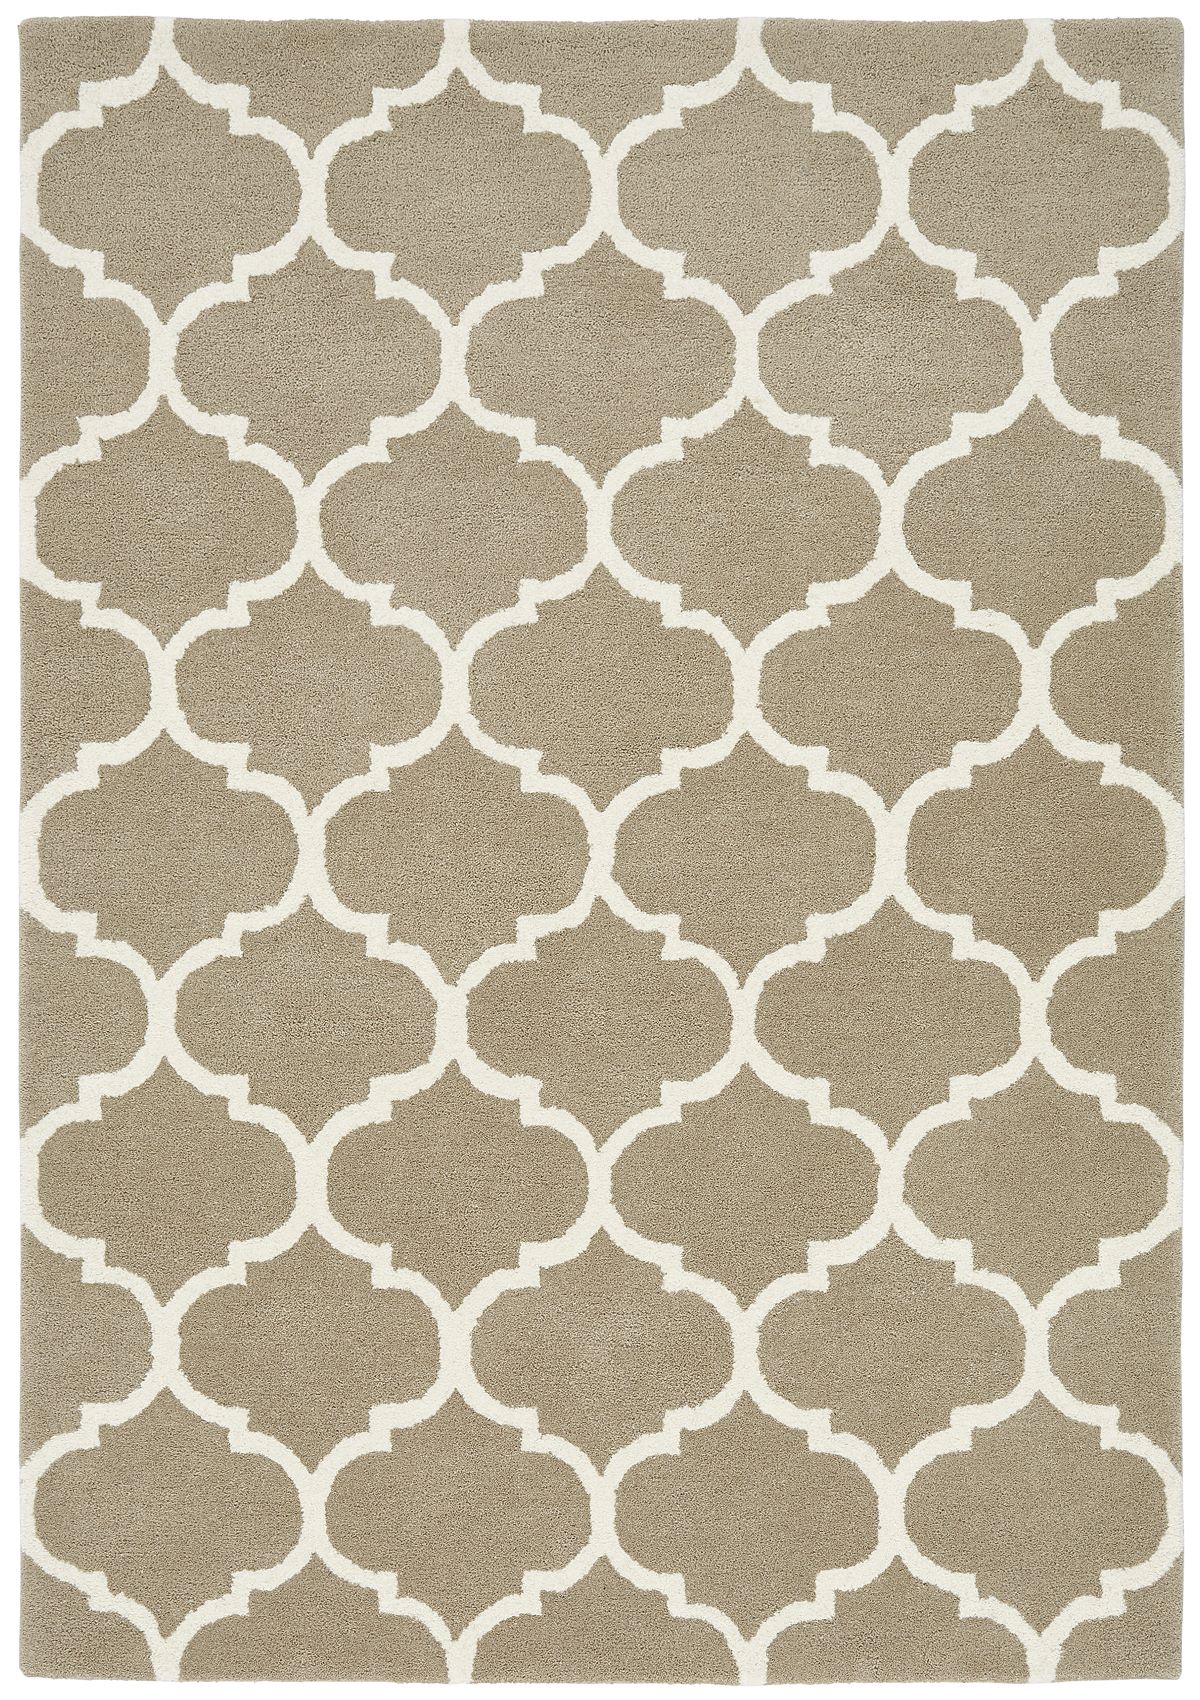 asiatic-rug-albany-ogee-camel